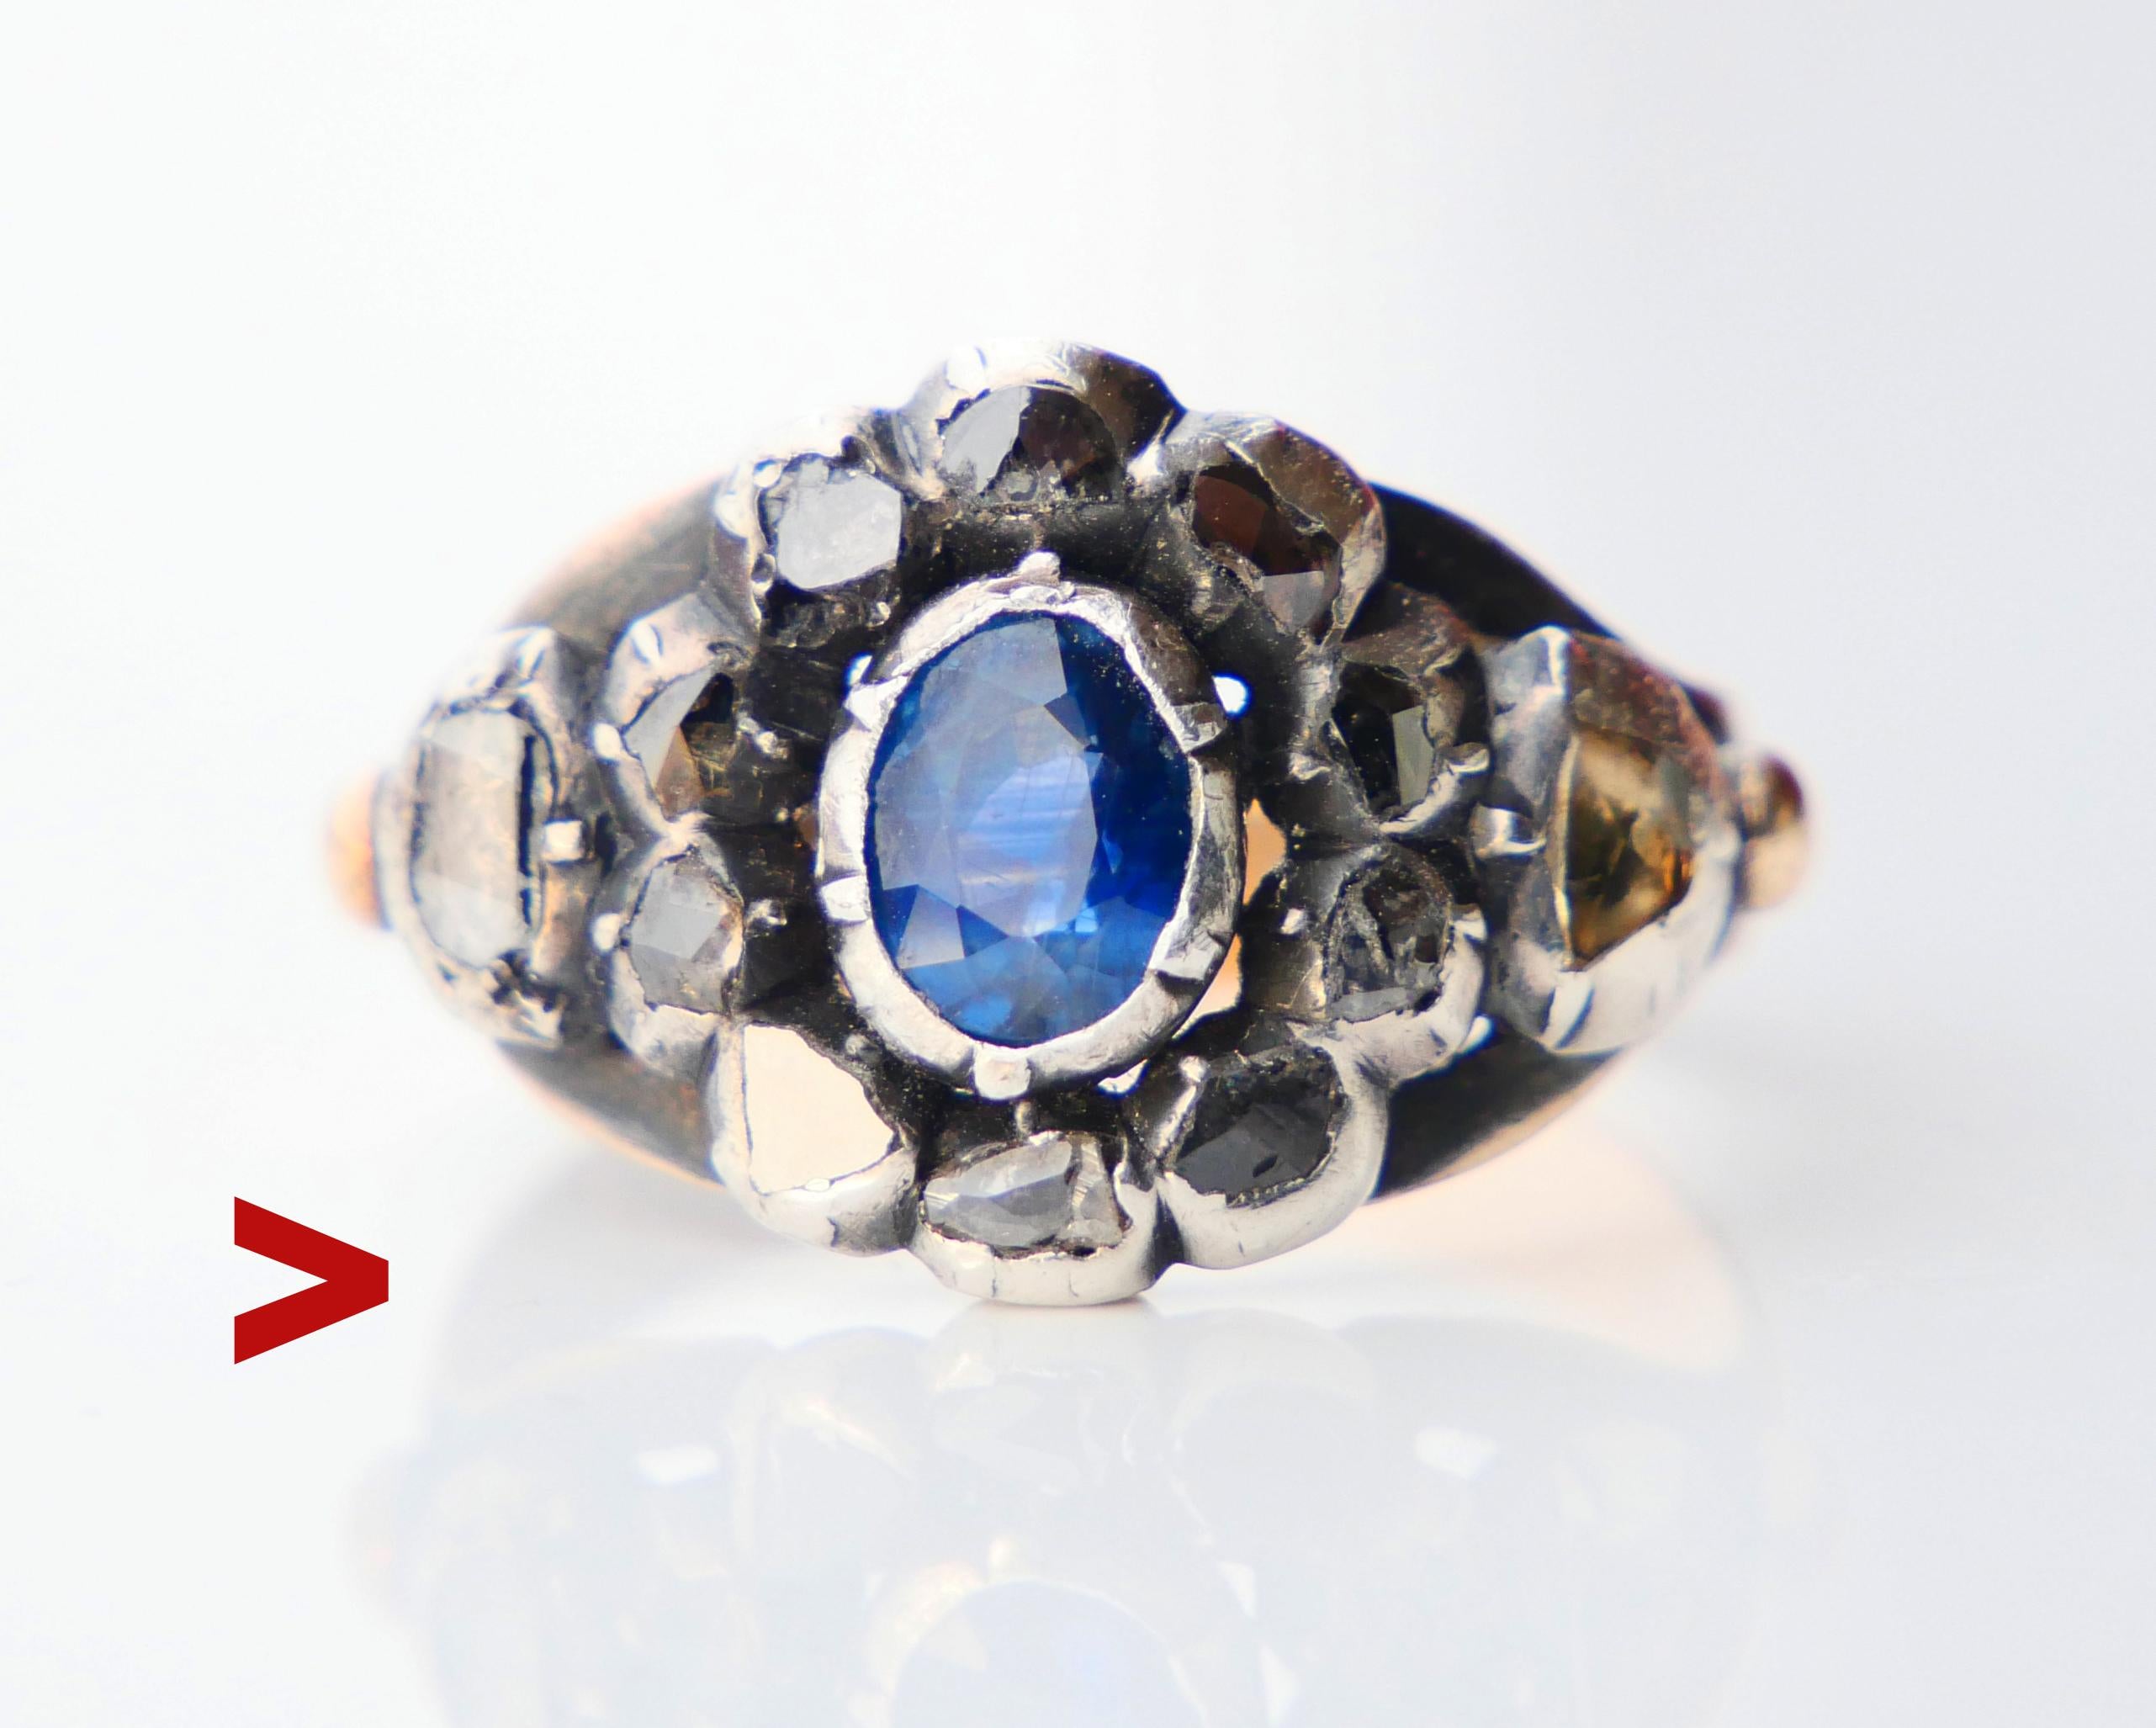 Beautiful ca. XIX -early XX-century antique Halo type ring. Band in tested 18K Rose Gold. The Crown's top in Silver decorated with natural oval diamond cut Sapphire of medium Blue color,internal structure typical for naturals, measures 6.5 mm x 4.5